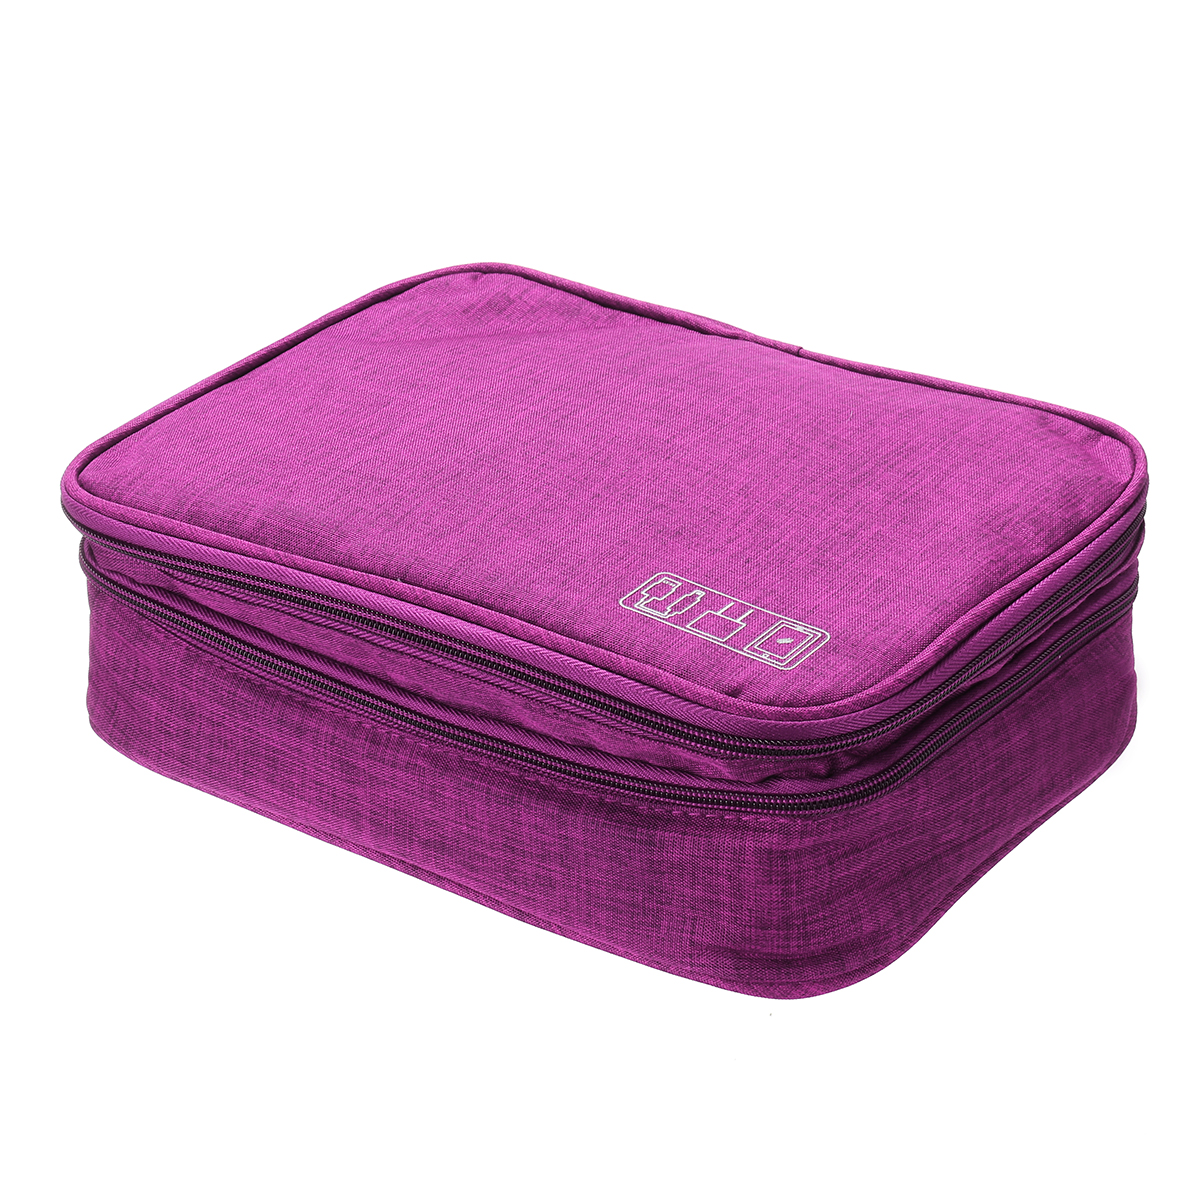 Find Data Cable Storage Bag Multifunctional Digital Devices Stationery Case Portable Travel Electronic Pouch Earbuds Earphone Organizer for Sale on Gipsybee.com with cryptocurrencies